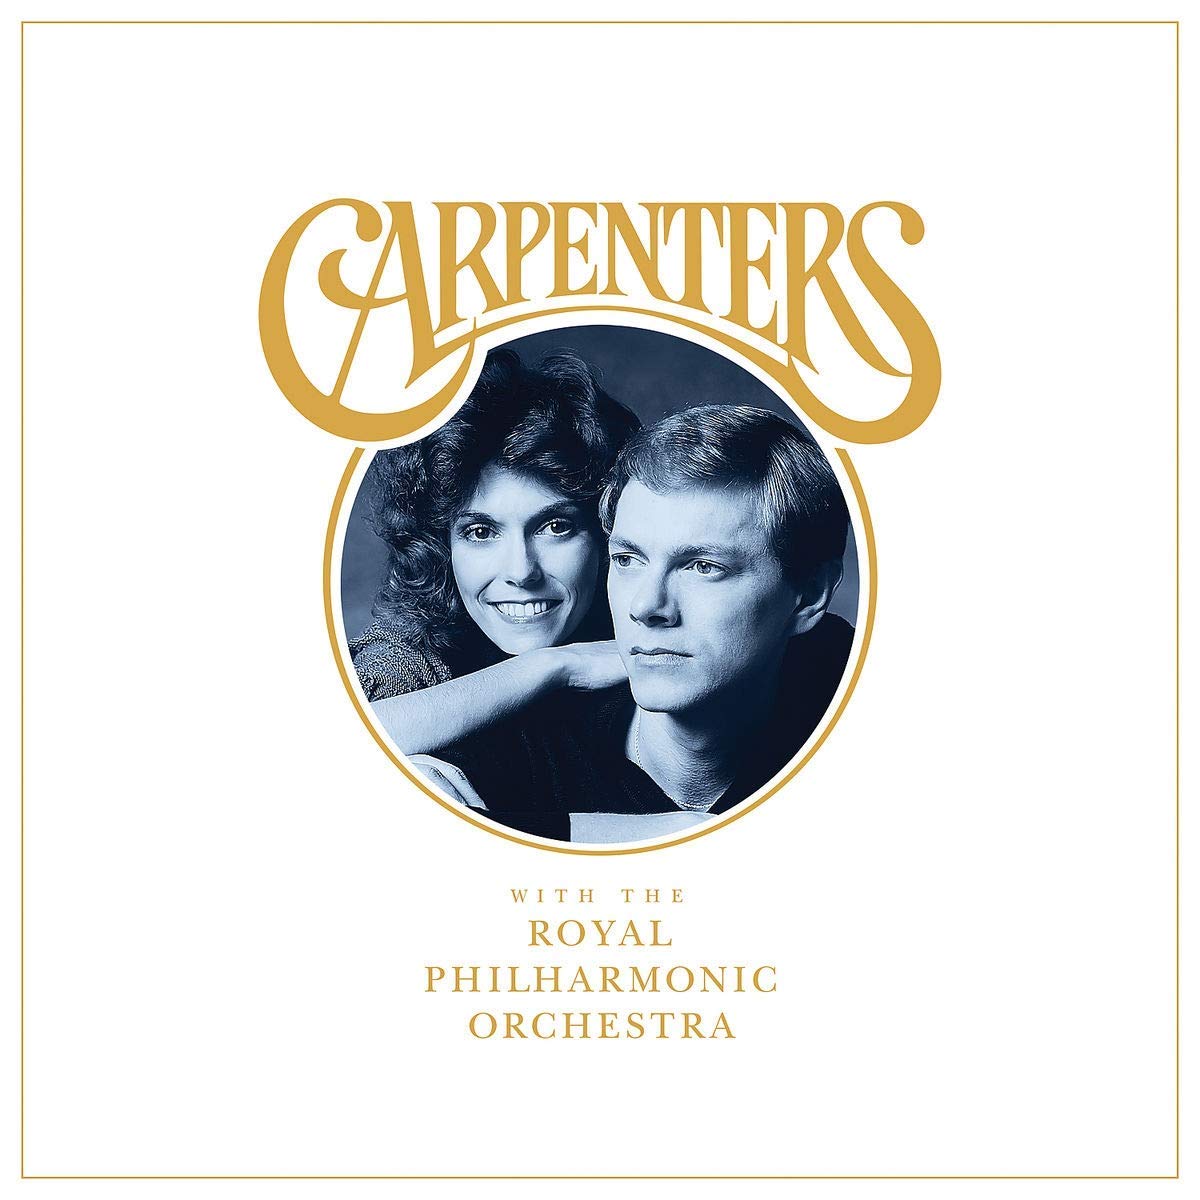 CD Shop - CARPENTERS CARPENTERS WITH THE ROYAL PHILHARMONIC ORCHESTRA